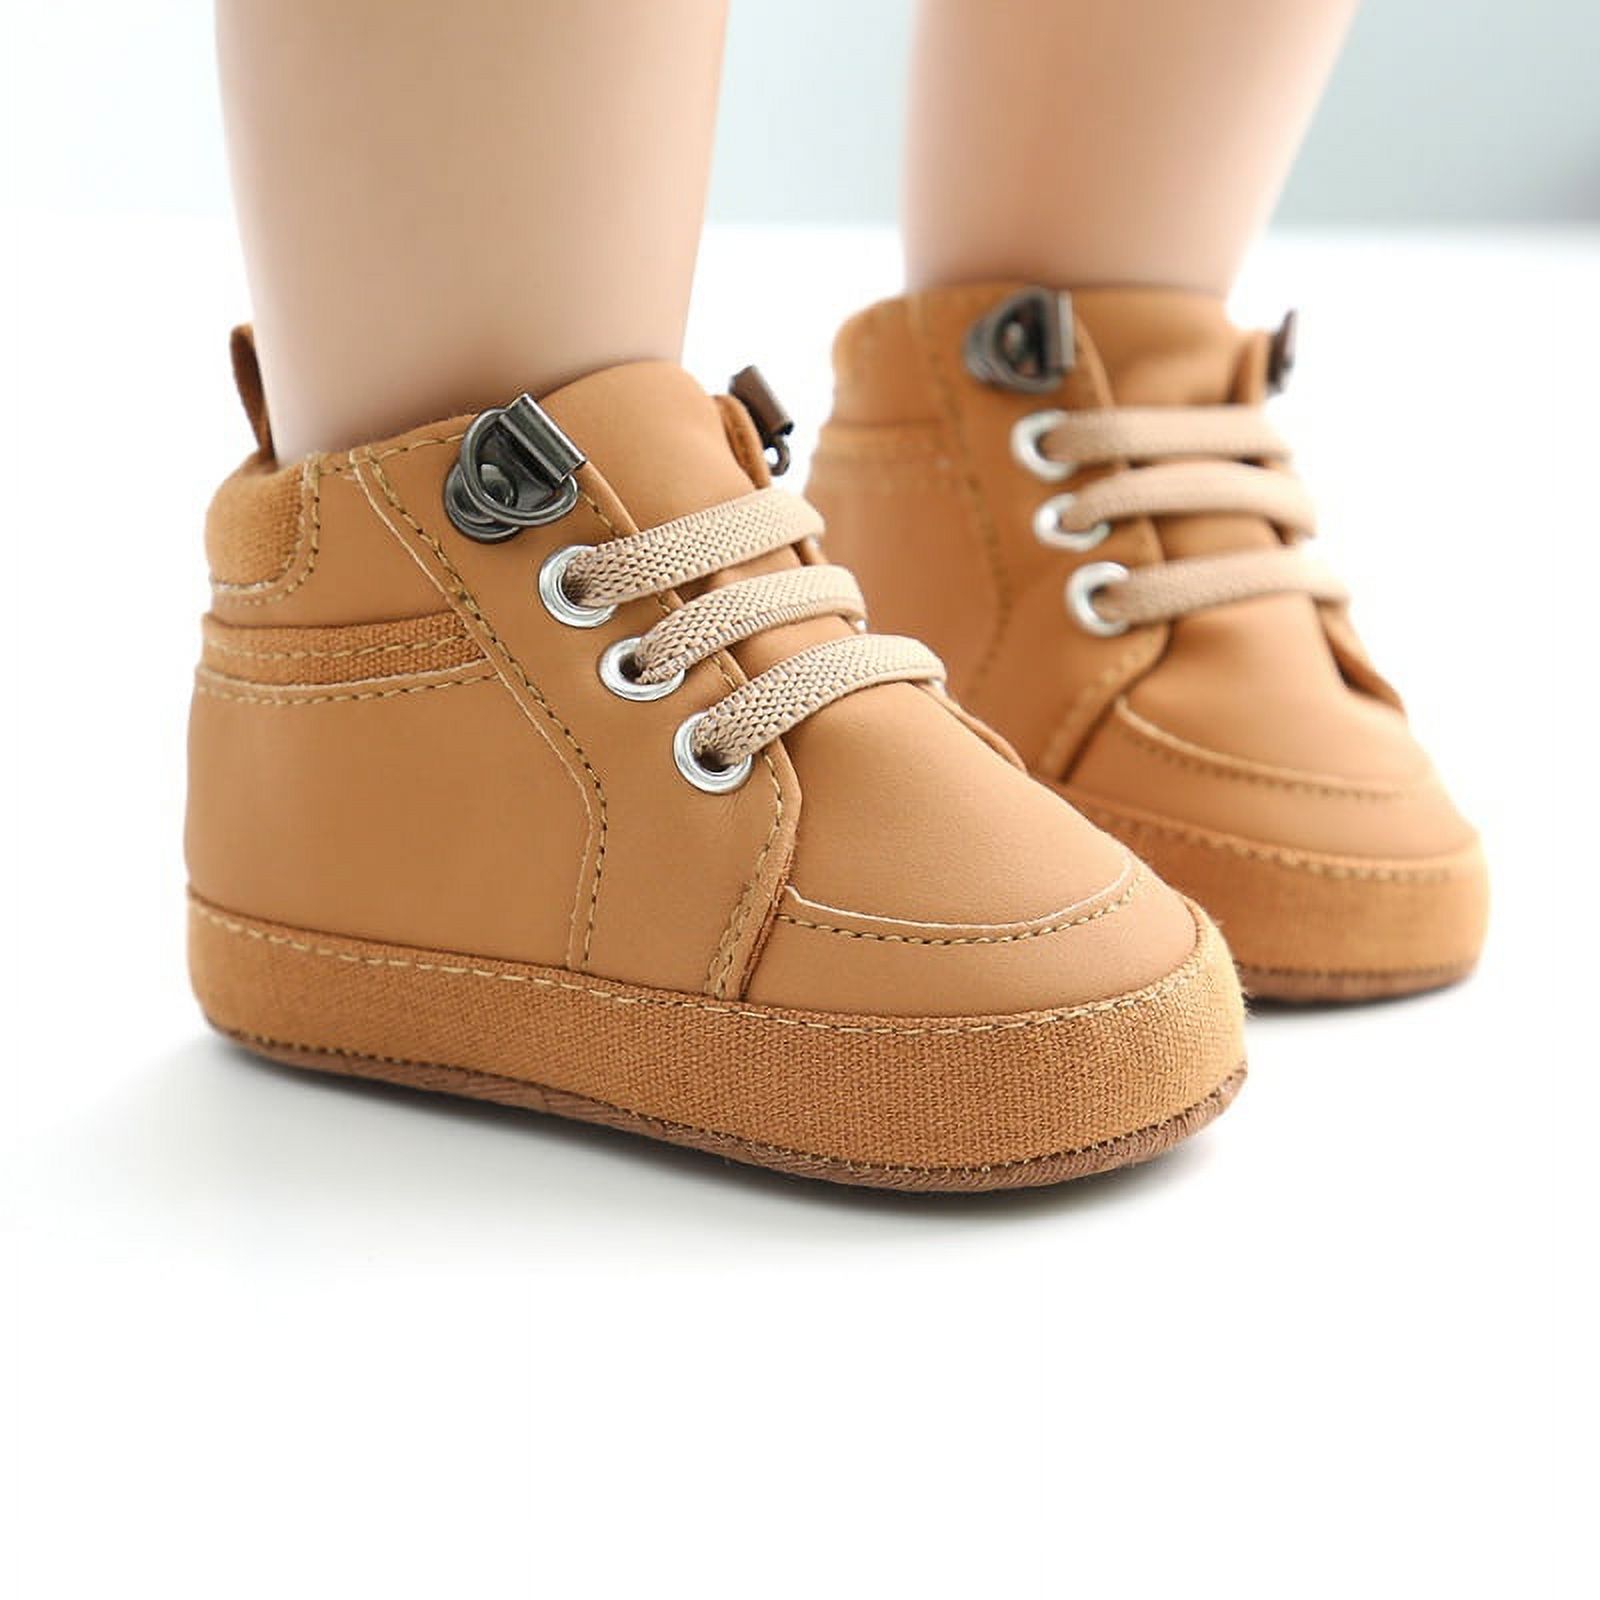 Baby Girls Boys Walking Shoes Toddler Infant First Walker Soft Sole High-Top Ankle Sneakers Newborn Crib Shoe - image 3 of 7